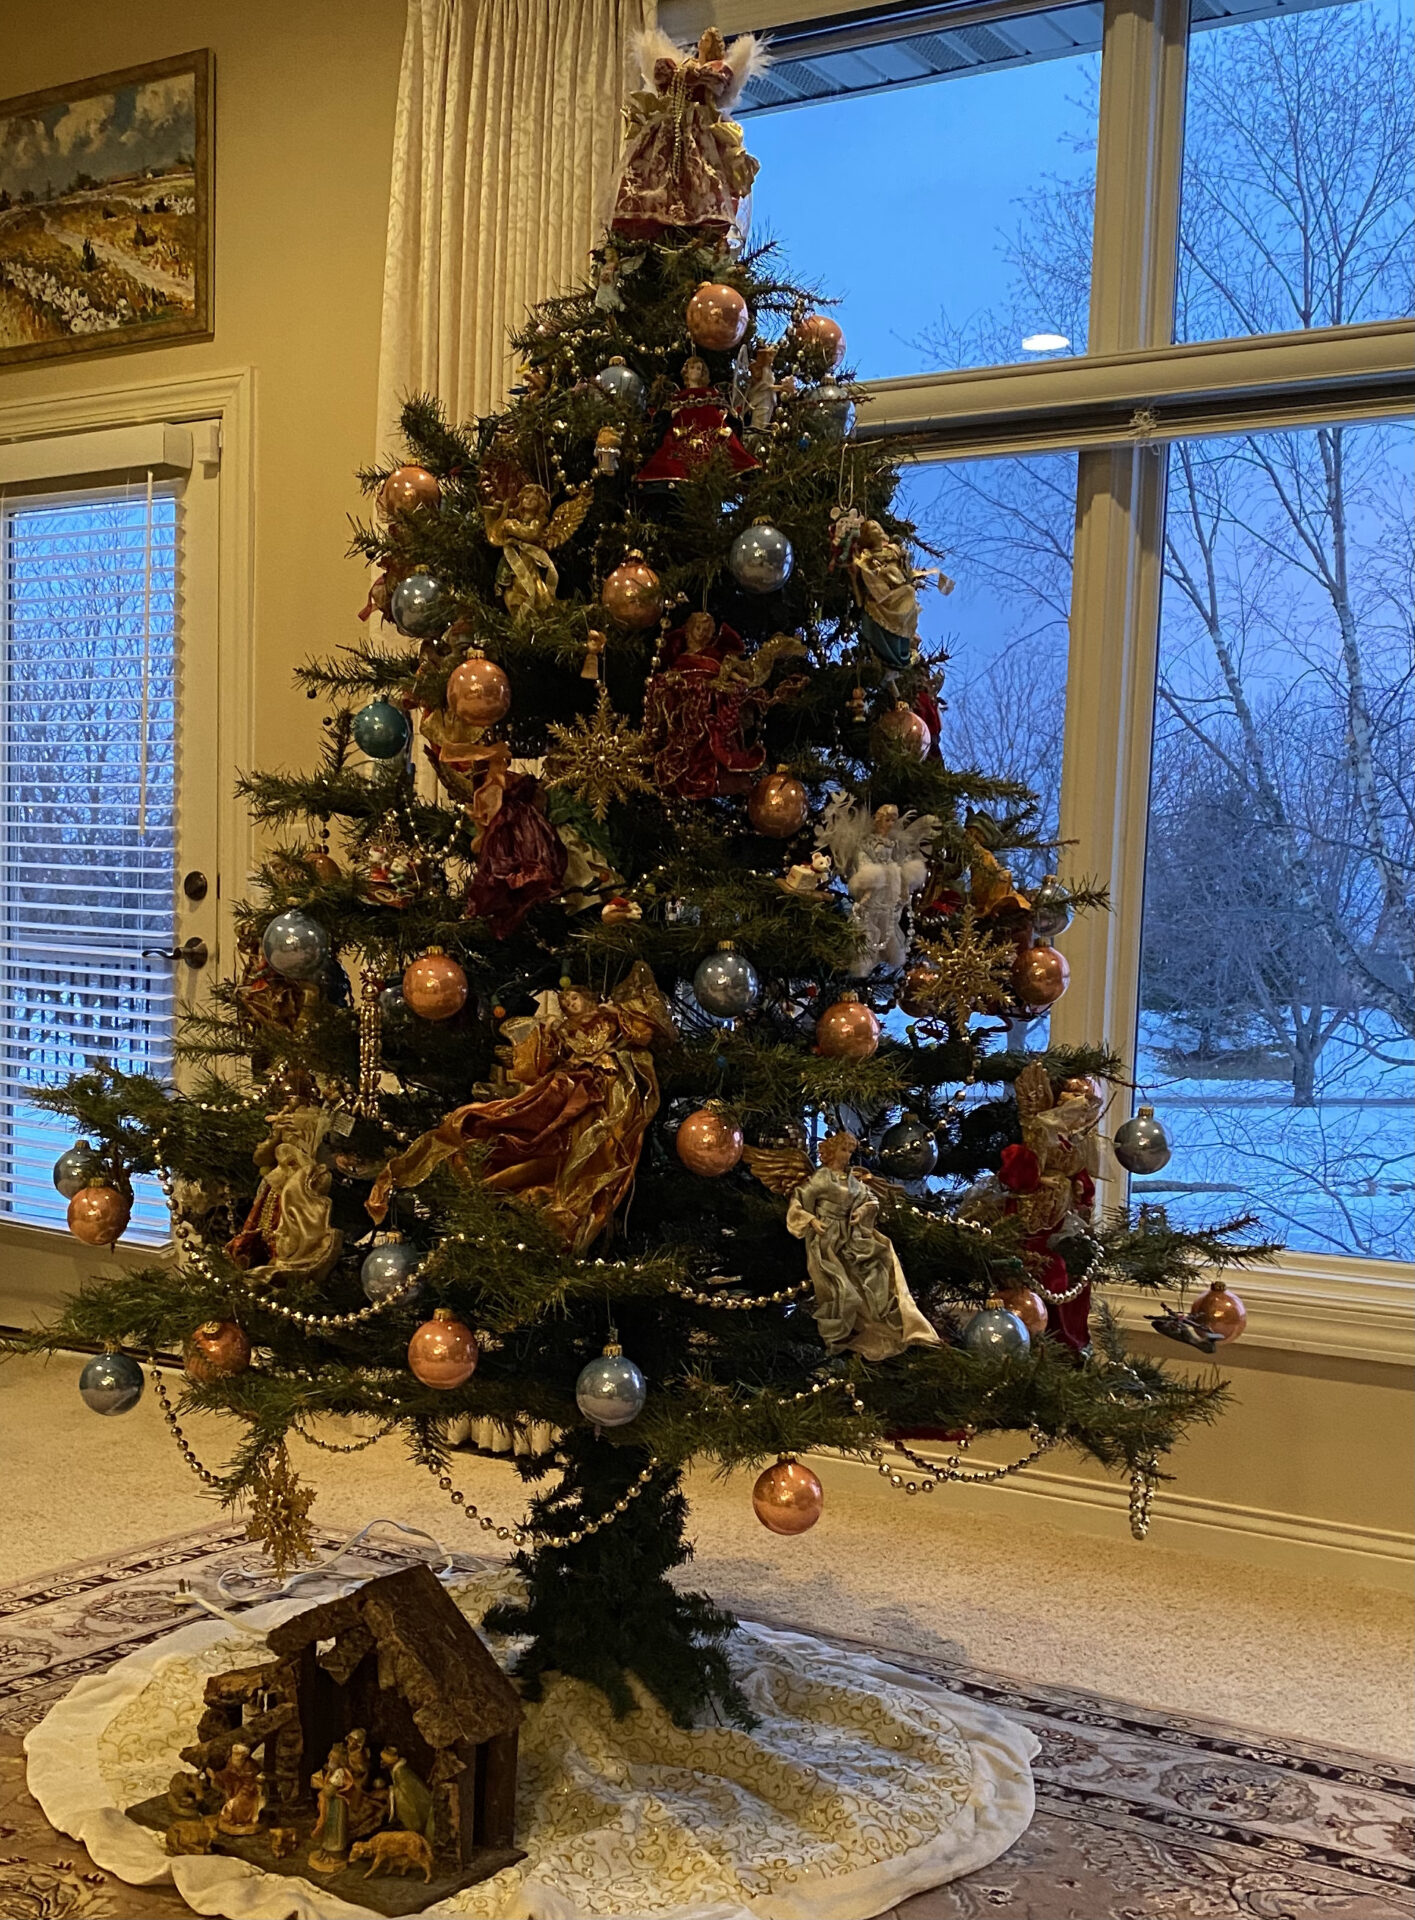 Christmas 2021: Our artificial tree has lost needles, and many branches are bent. We tried a new artificial tree, but the ornaments didn't fit well. So we decorated this old tree one last time.